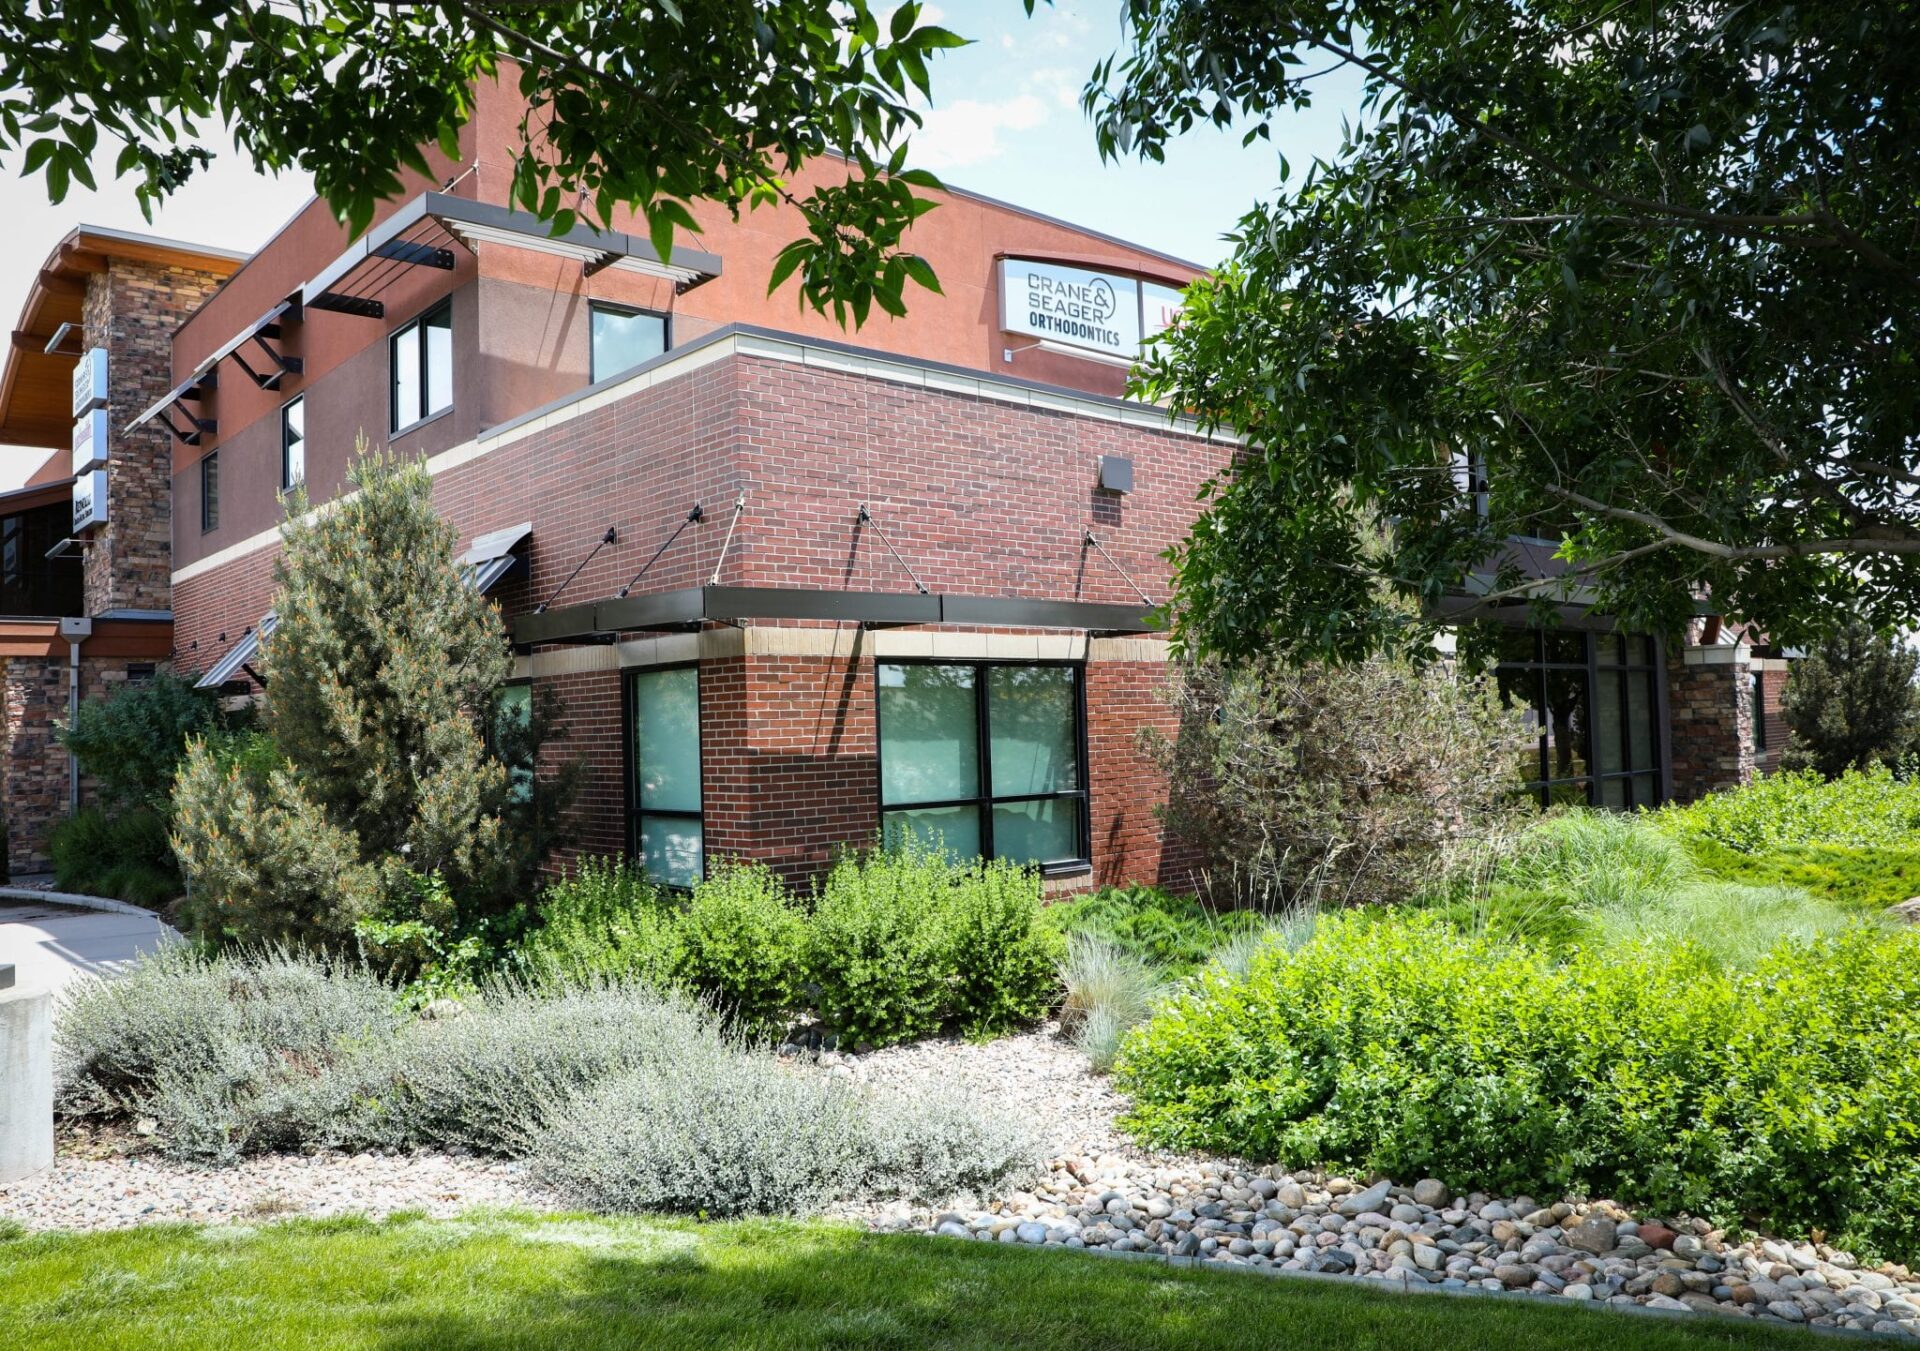 Office location | Crane & Seager Orthodontics in Fort Collins and Loveland, CO